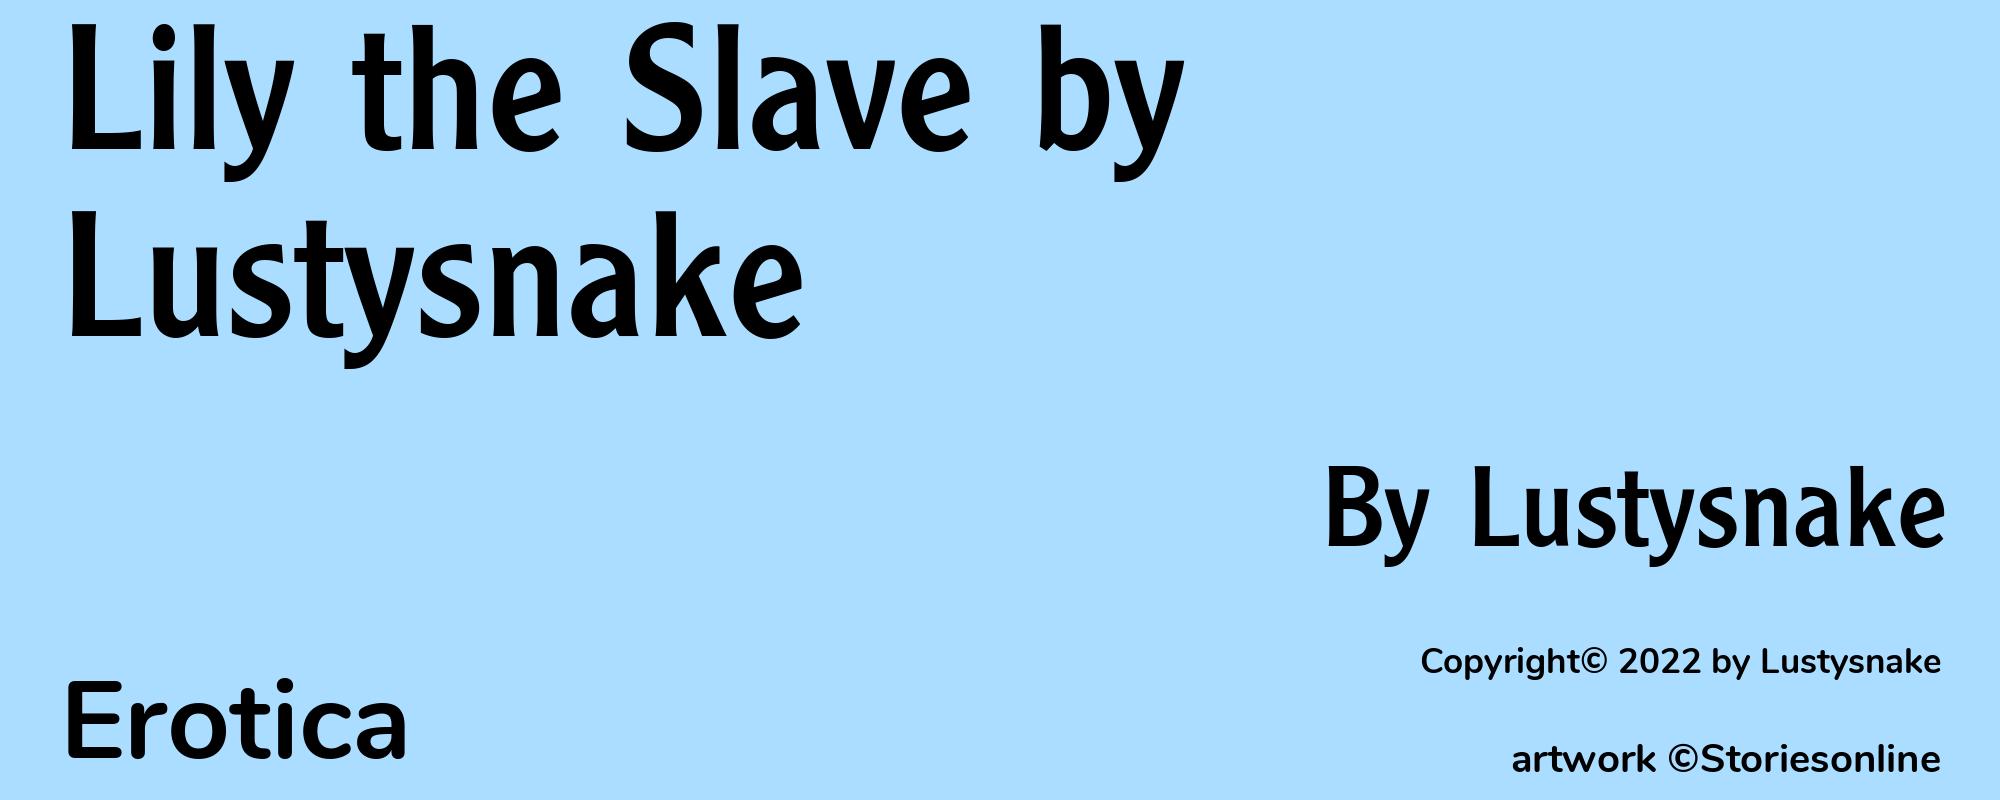 Lily the Slave by Lustysnake - Cover